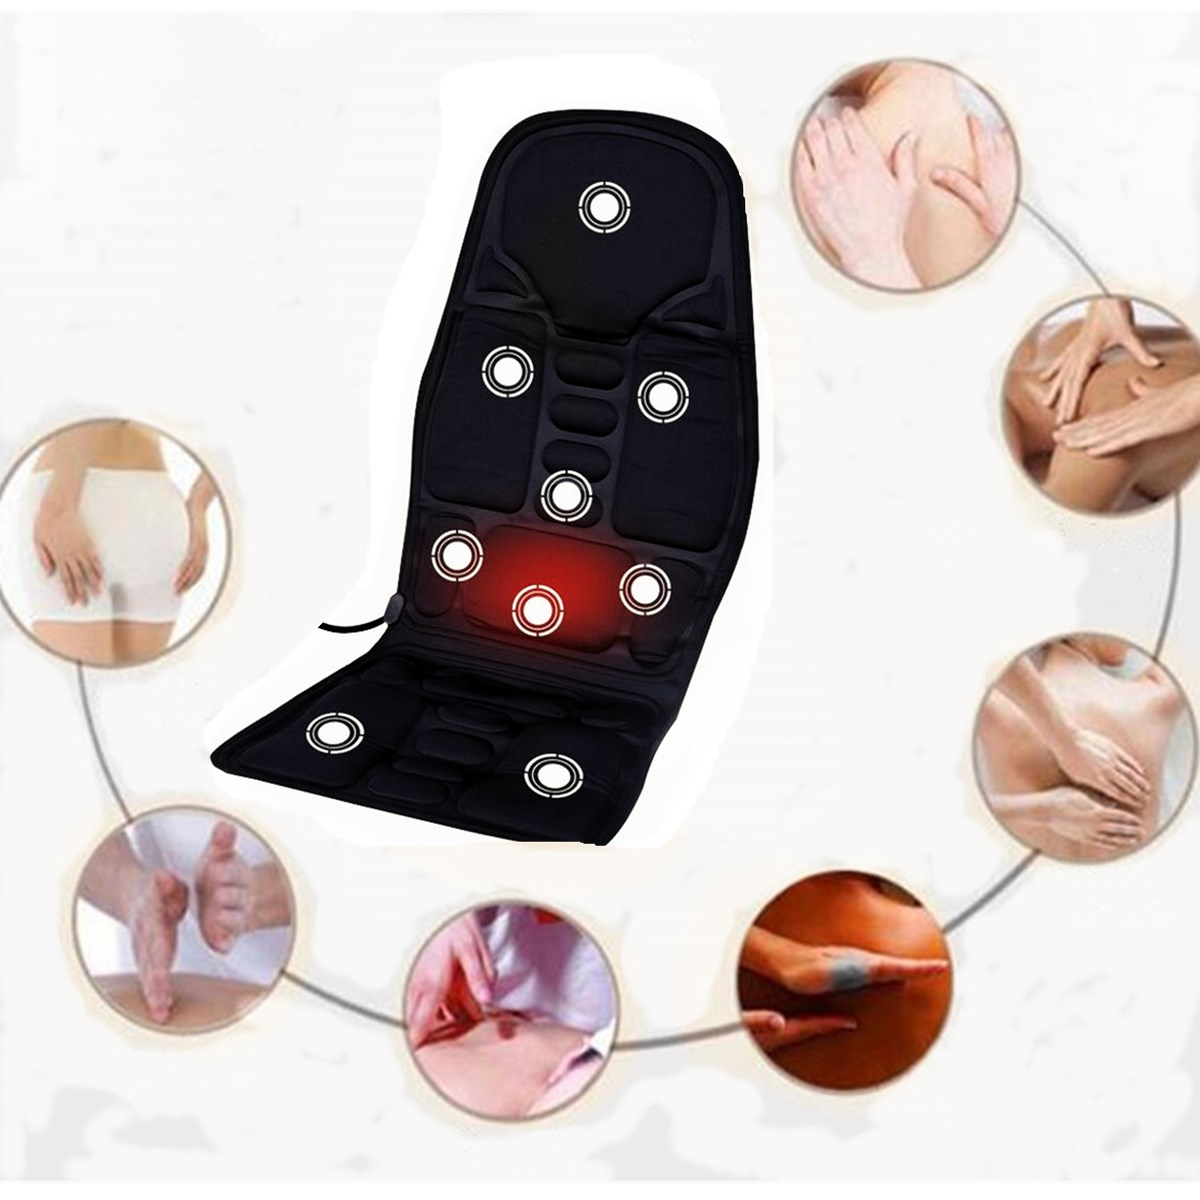 12V-Car-Household-Heated-Full-Body-Massage-Seat-Cushion-Back-Lumbar-Pain-Relief-Vibration-Massager-1127375